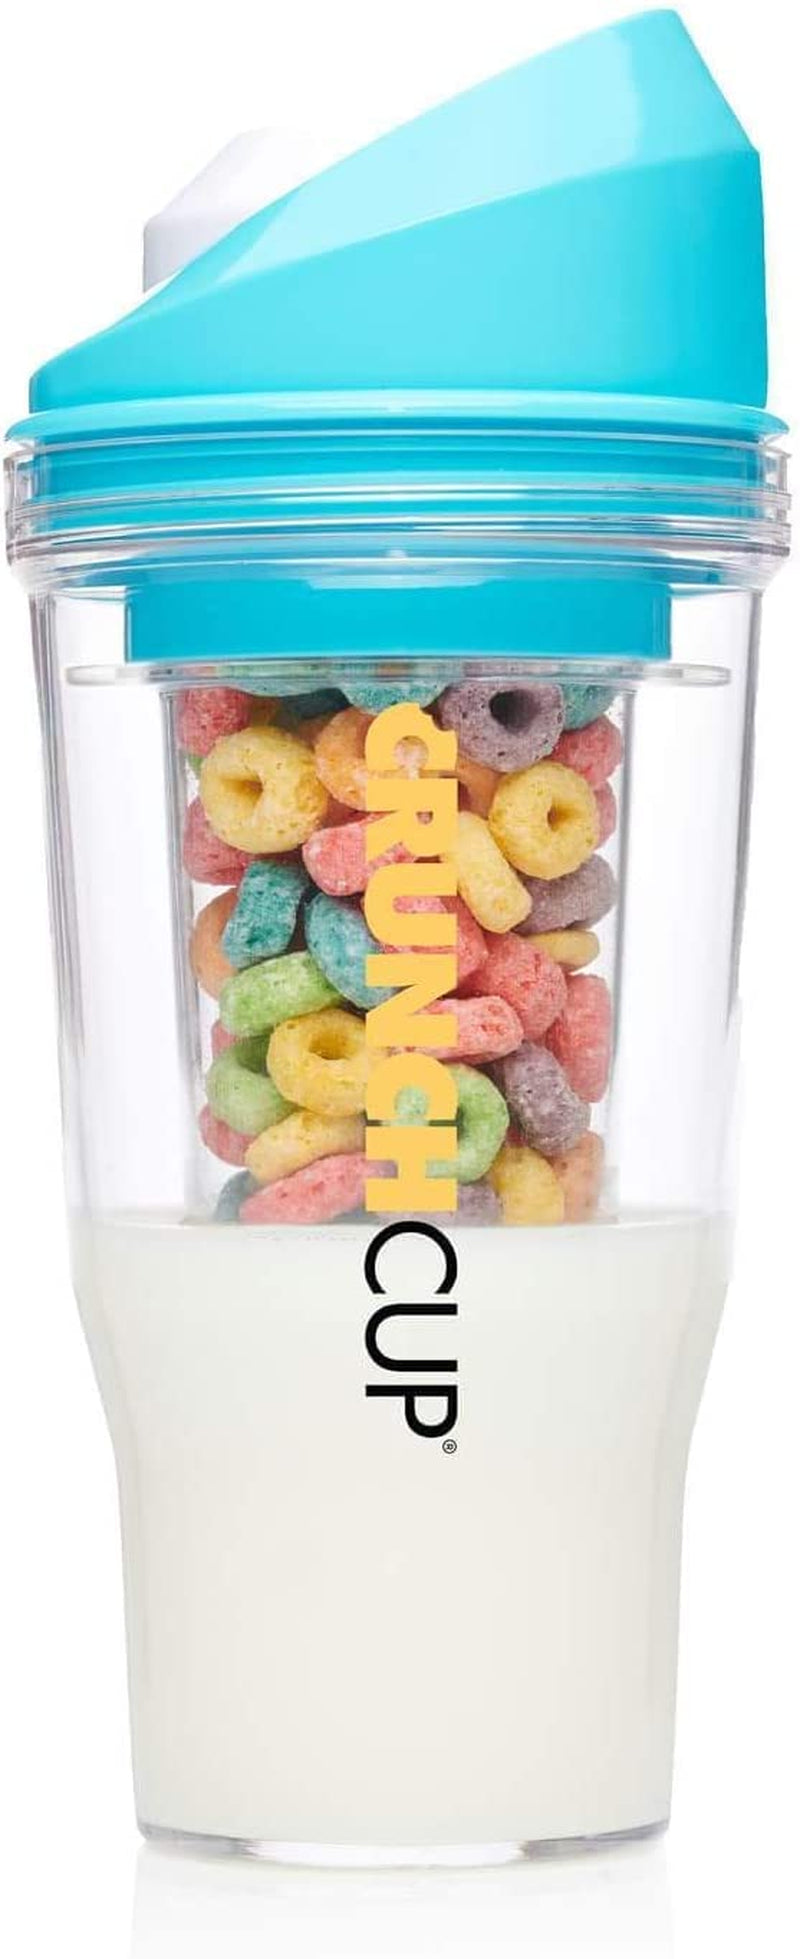 CRUNCHCUP the XL Blue - Portable Plastic Cereal Cups for Breakfast on the Go, to Go Cereal and Milk Container for Your Favorite Breakfast Cereals, No Spoon or Bowl Required